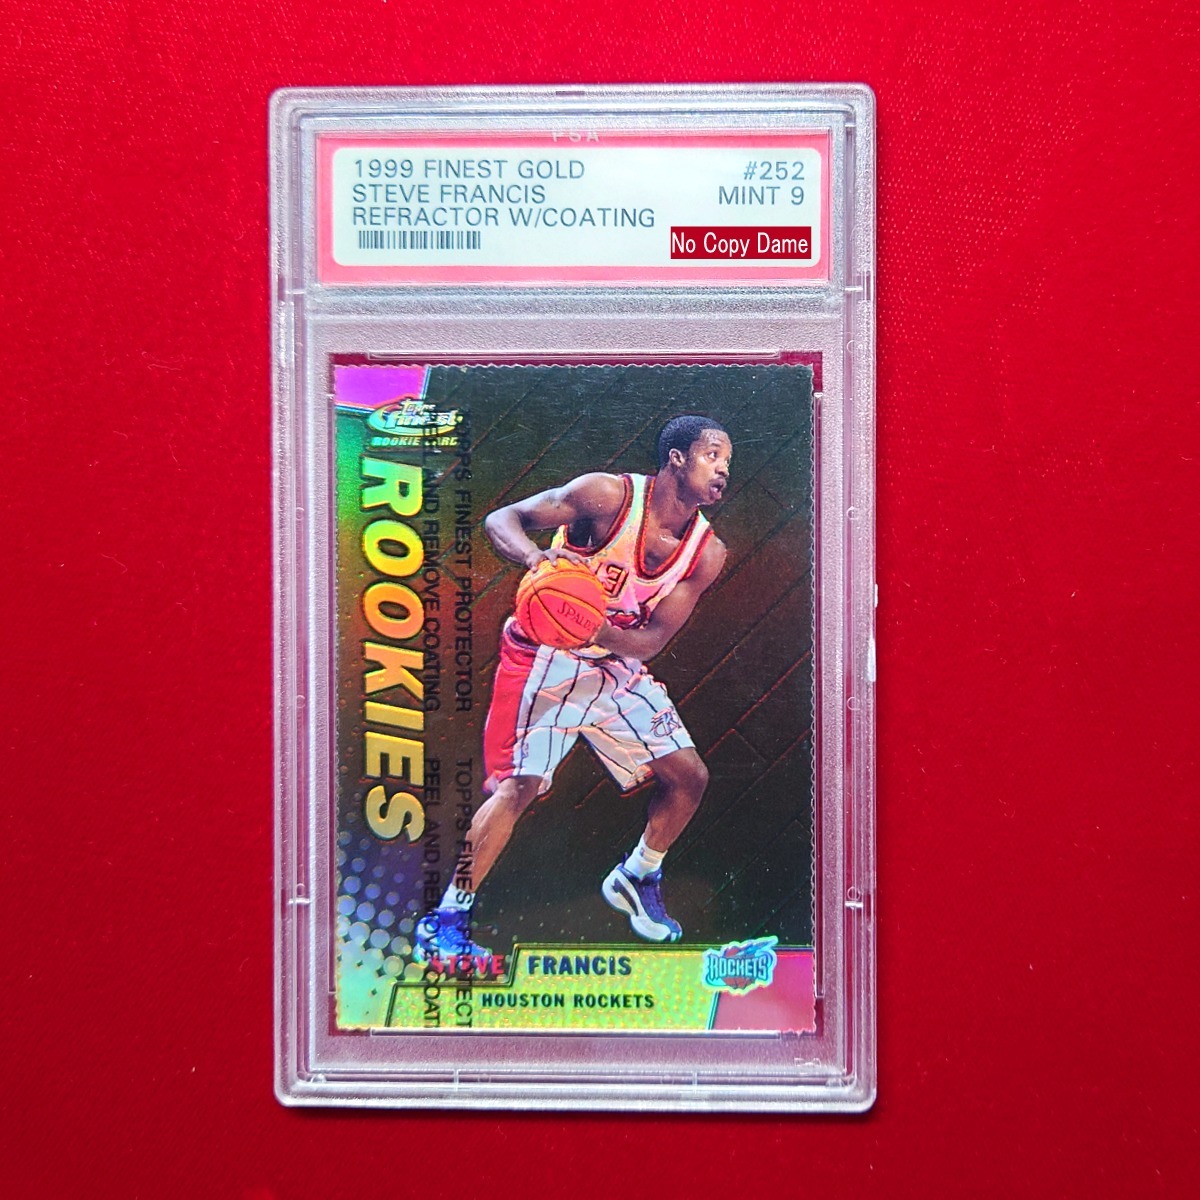 ◆Steve Francis Jersey#3【PSA9 RC】NBA 1999 Topps Finest ROOKIES Gold Refractor 3/100 W Coating card#252 ◇検索：ルーキーカード